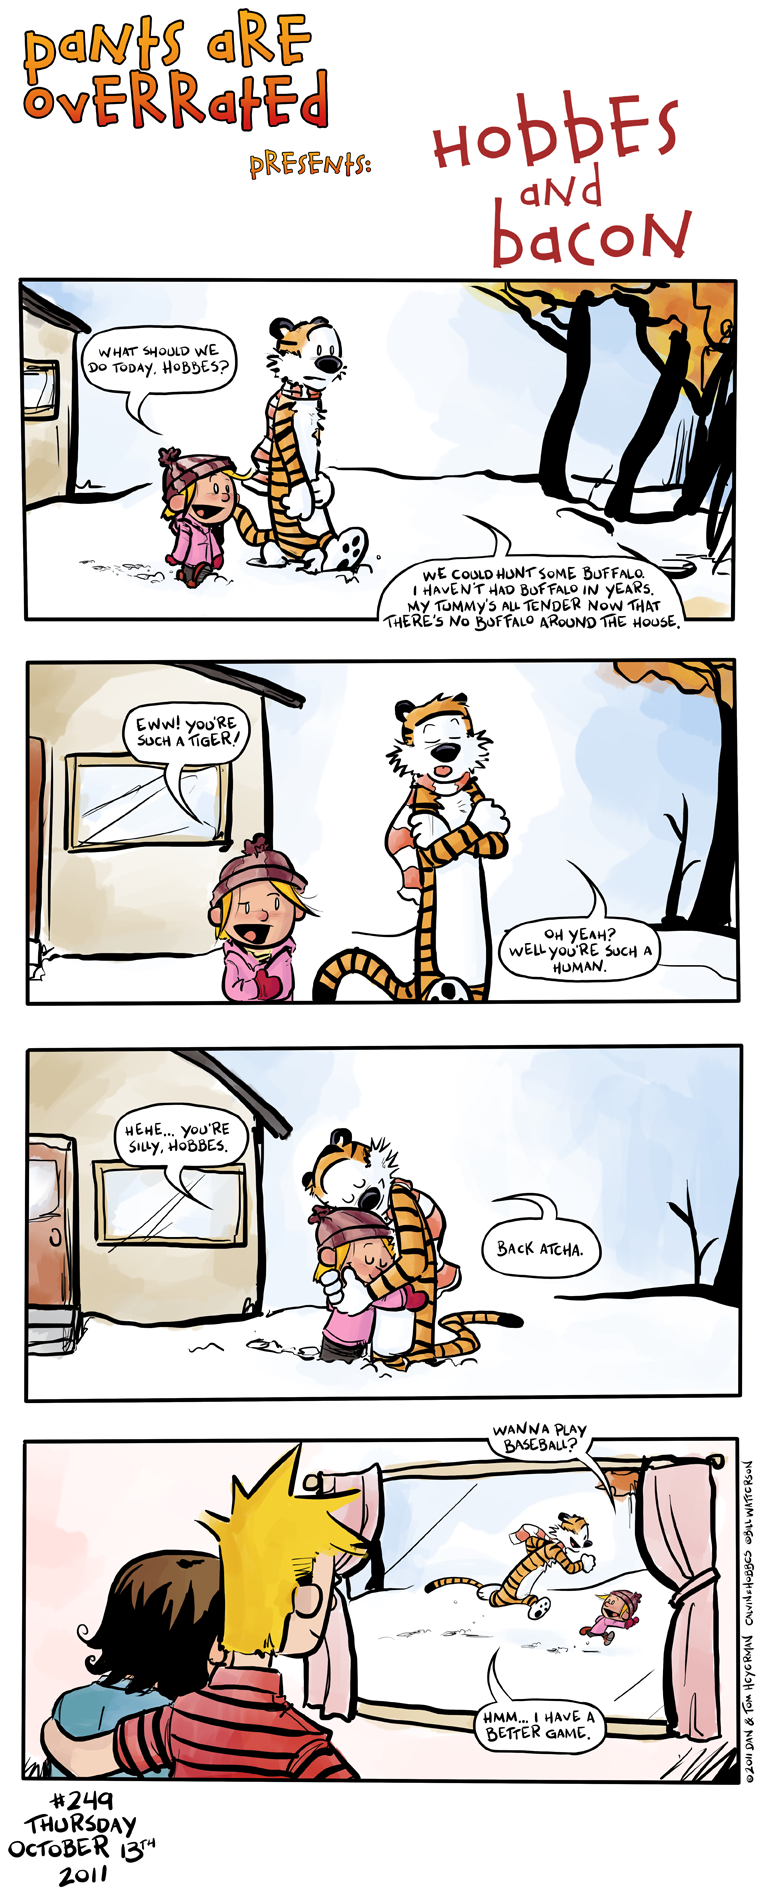 More Hobbes and Bacon